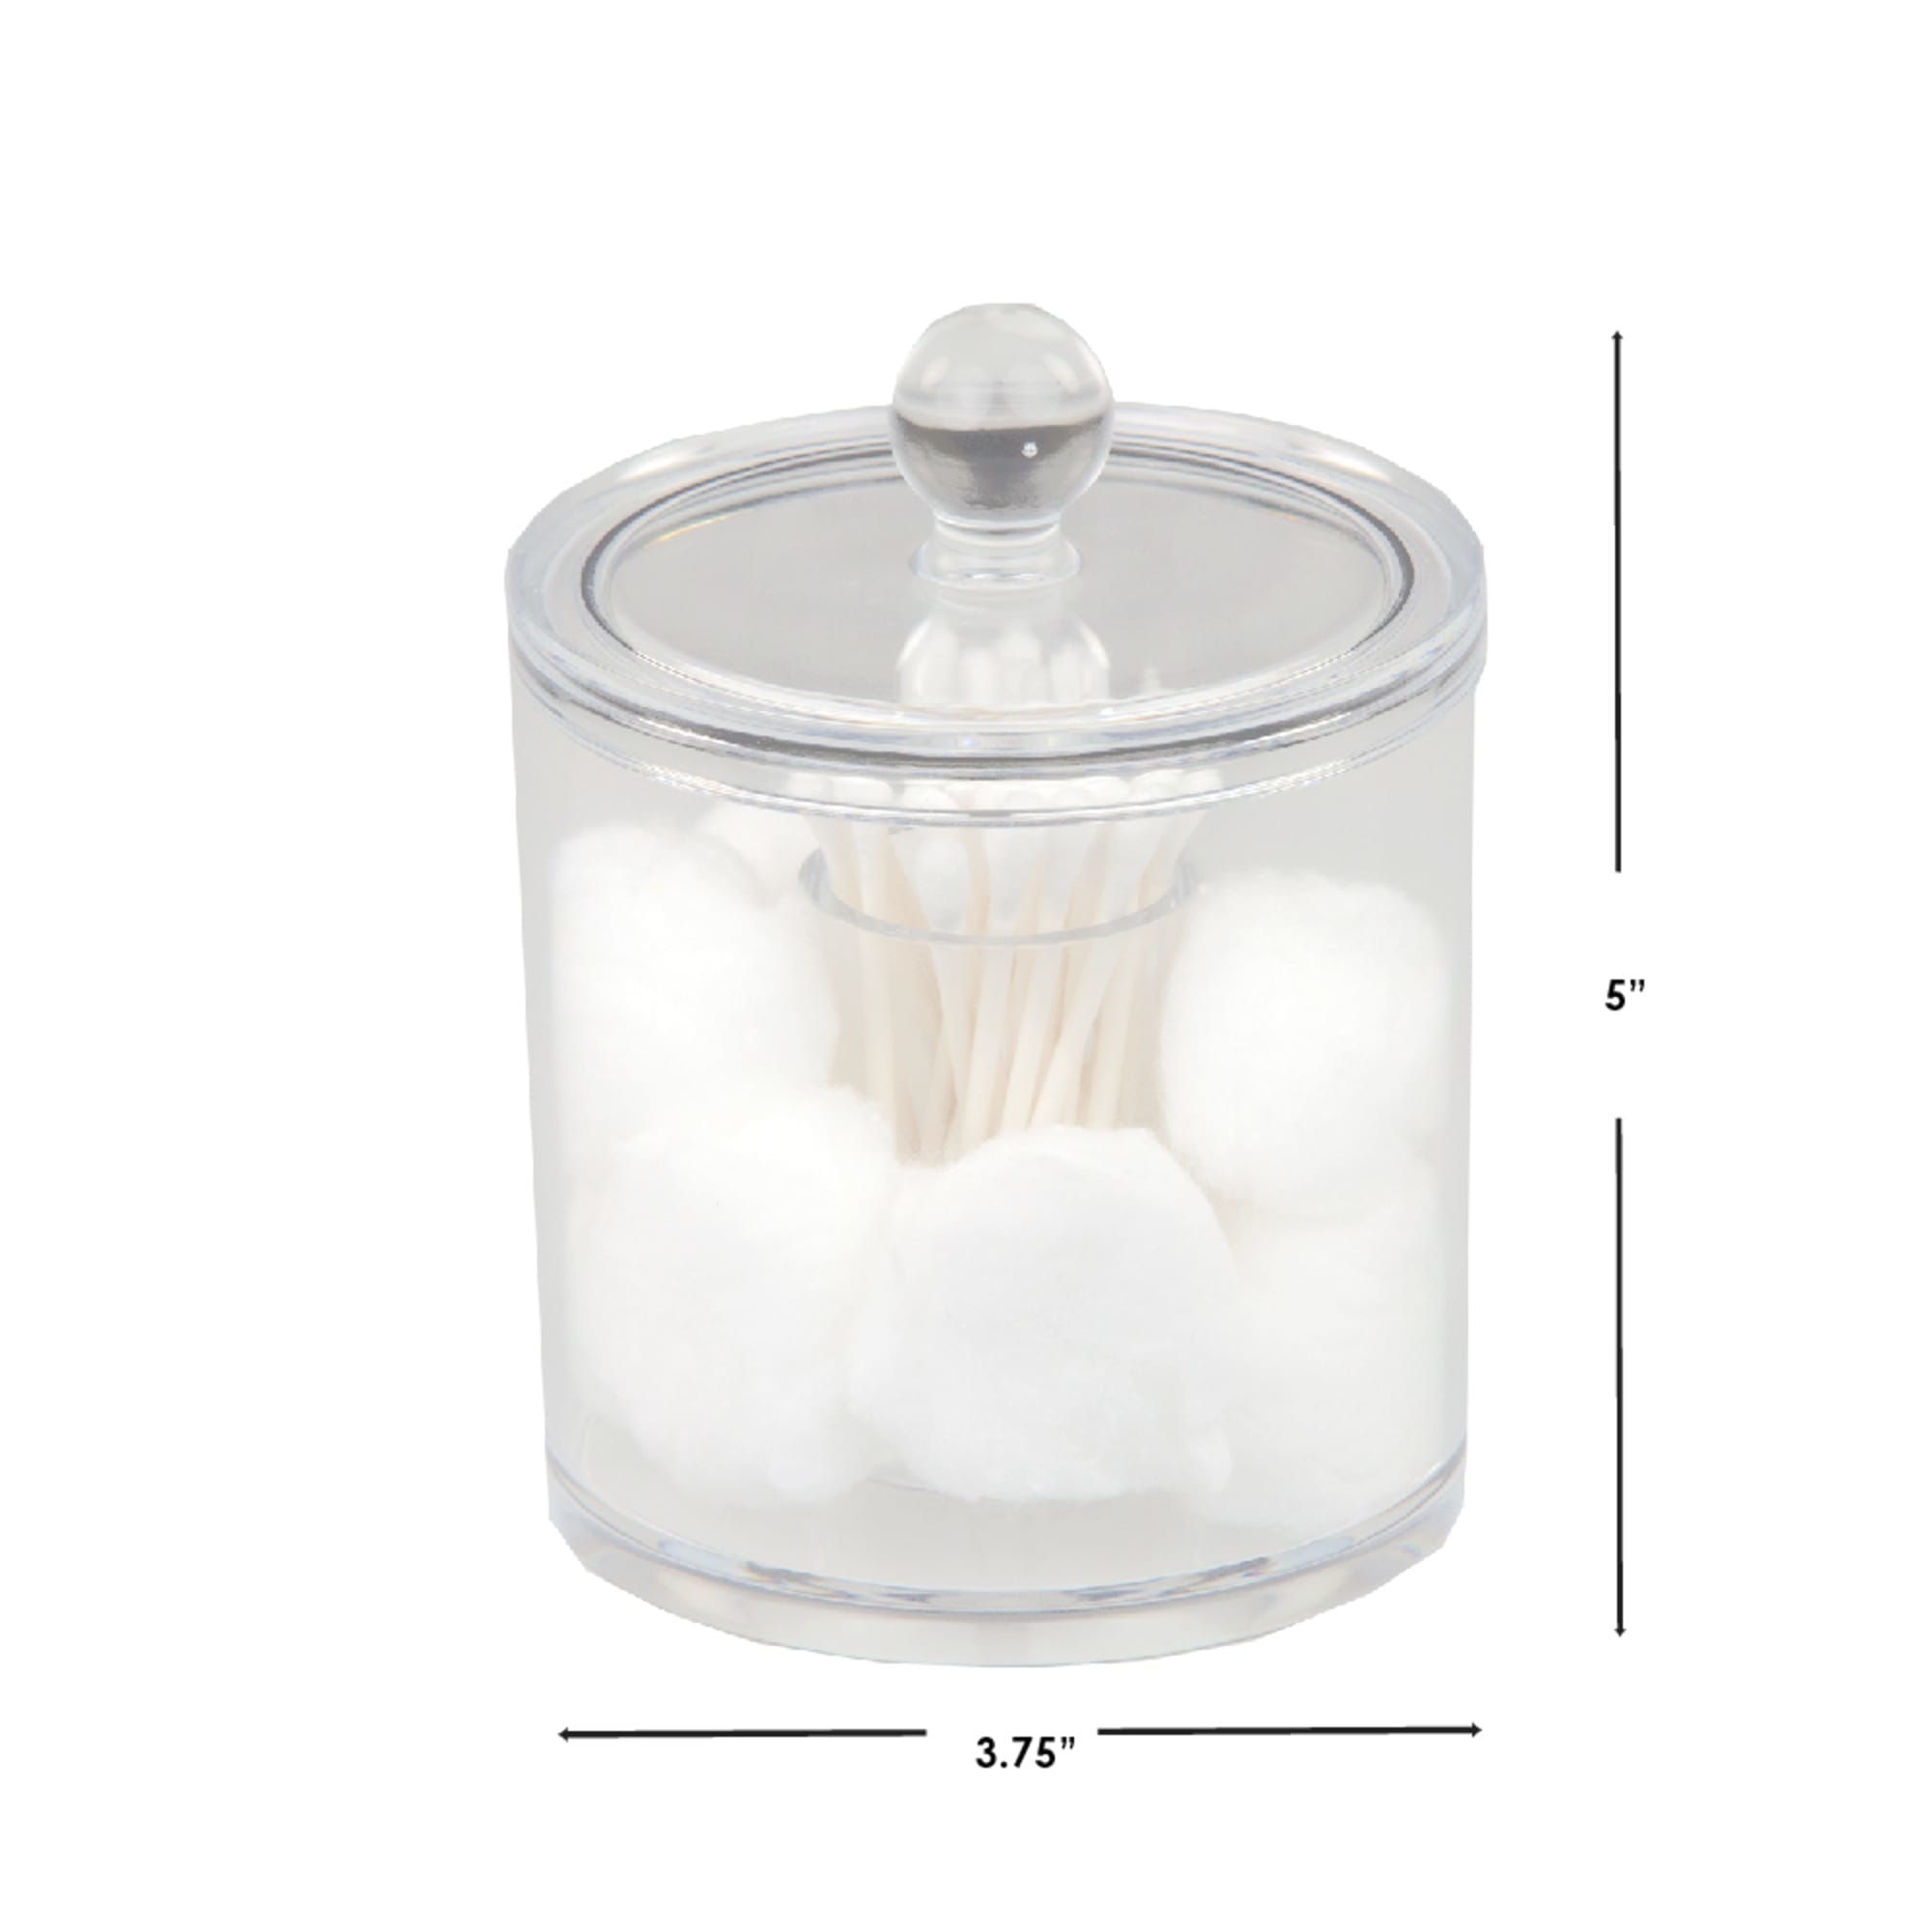 Home Basics Cotton Ball and Swab Organizer $2.50 EACH, CASE PACK OF 12